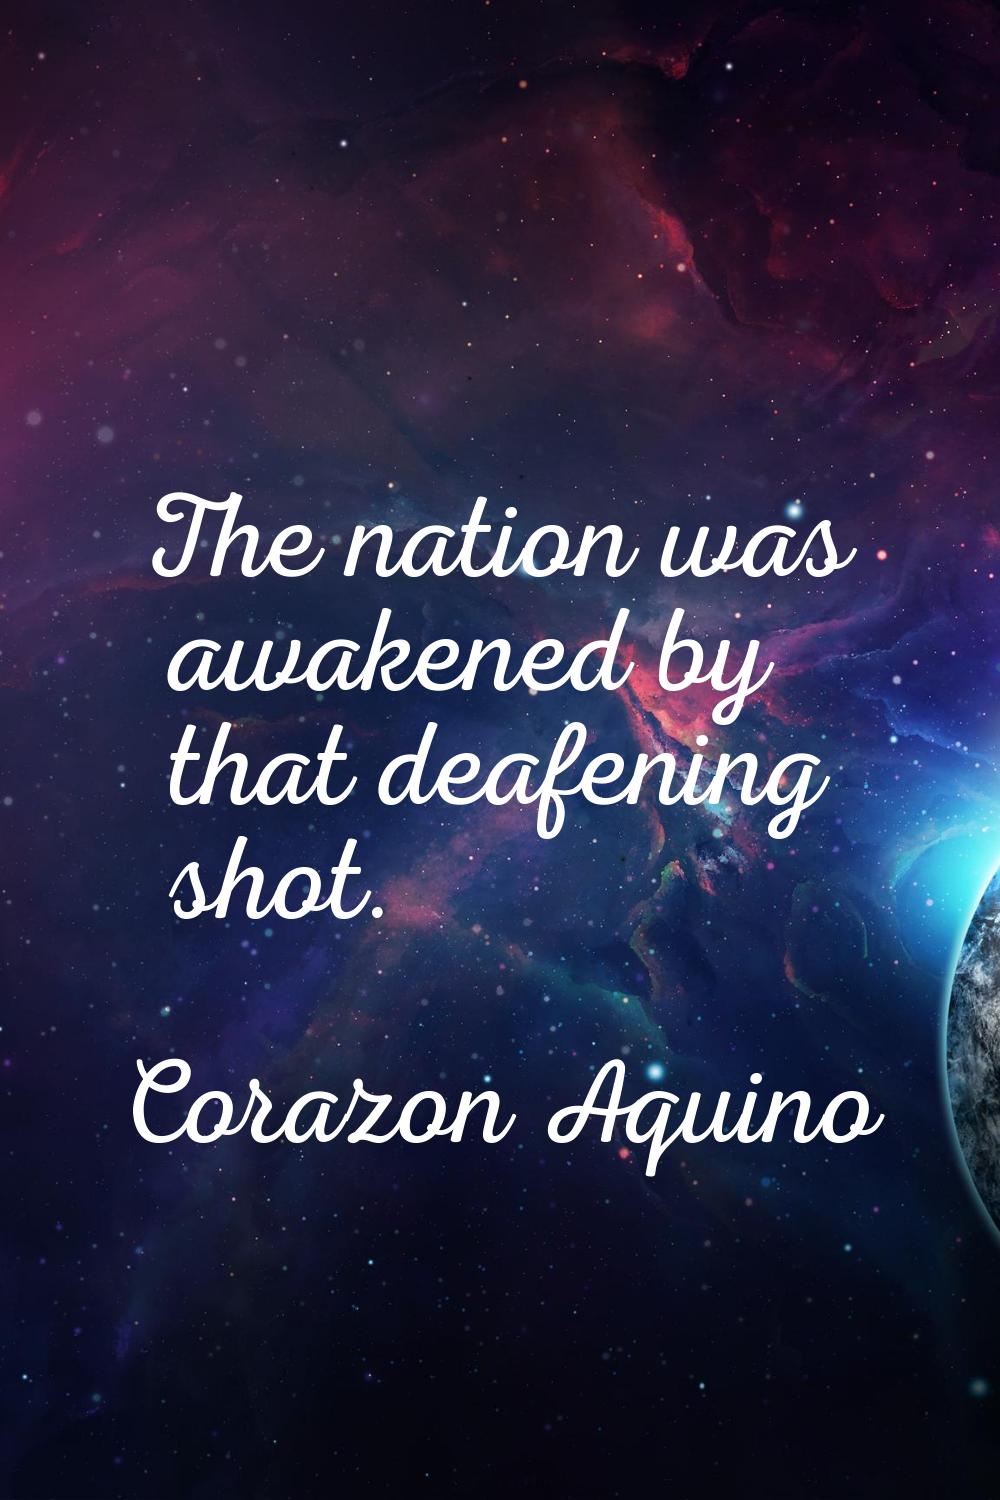 The nation was awakened by that deafening shot.